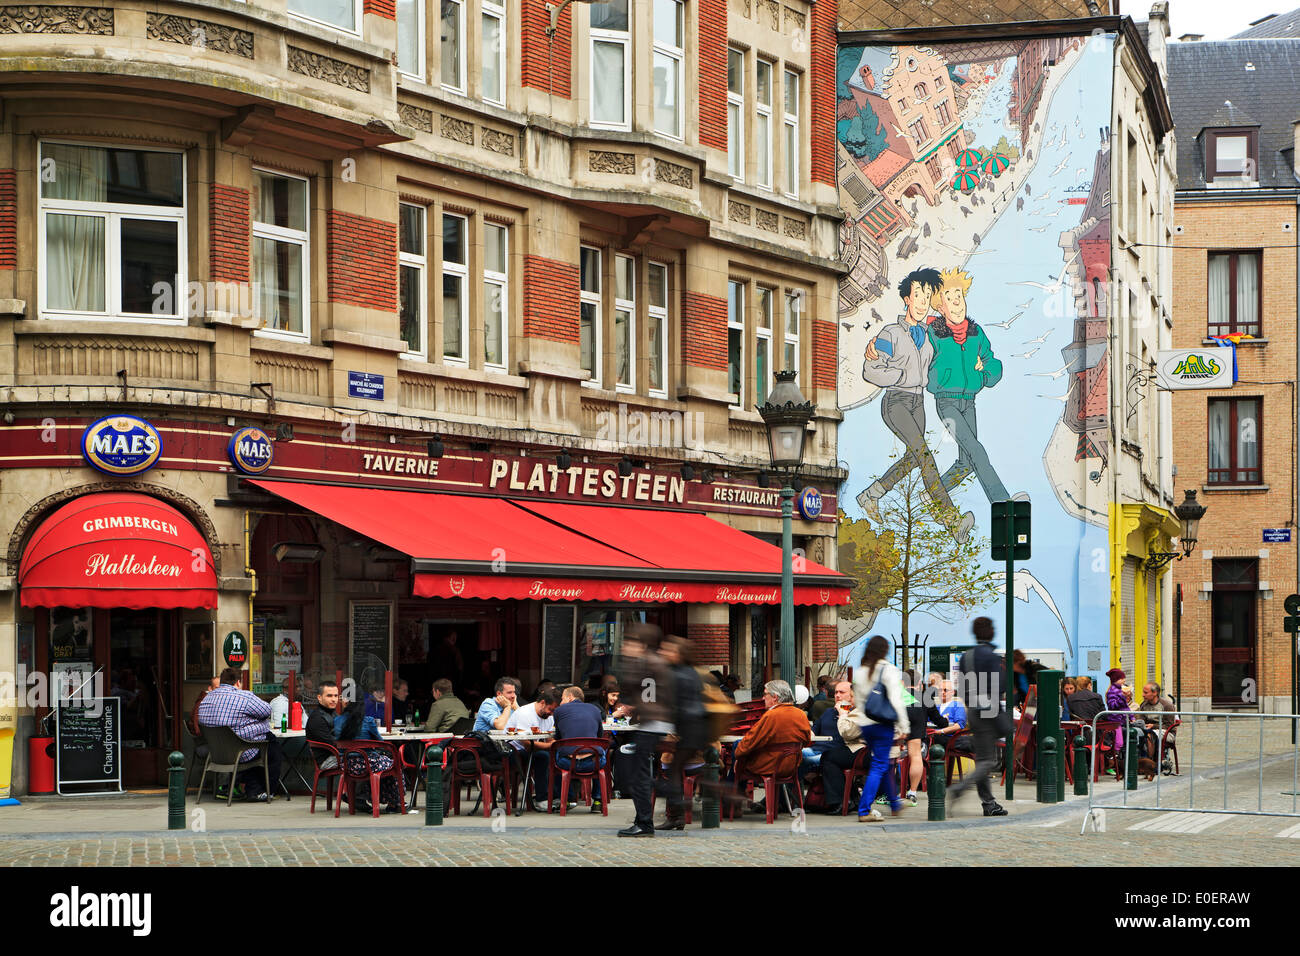 Cartoon painted on a building and cafe, Comic Strip Walk, Brussels, Belgium Stock Photo